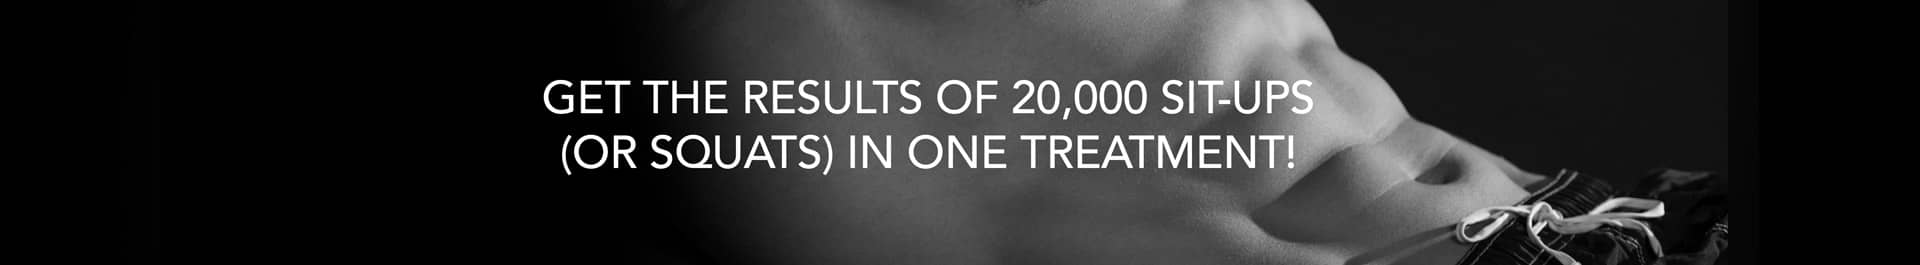 Get the results of 20,000 sit-ups (or squats) in one treatment!